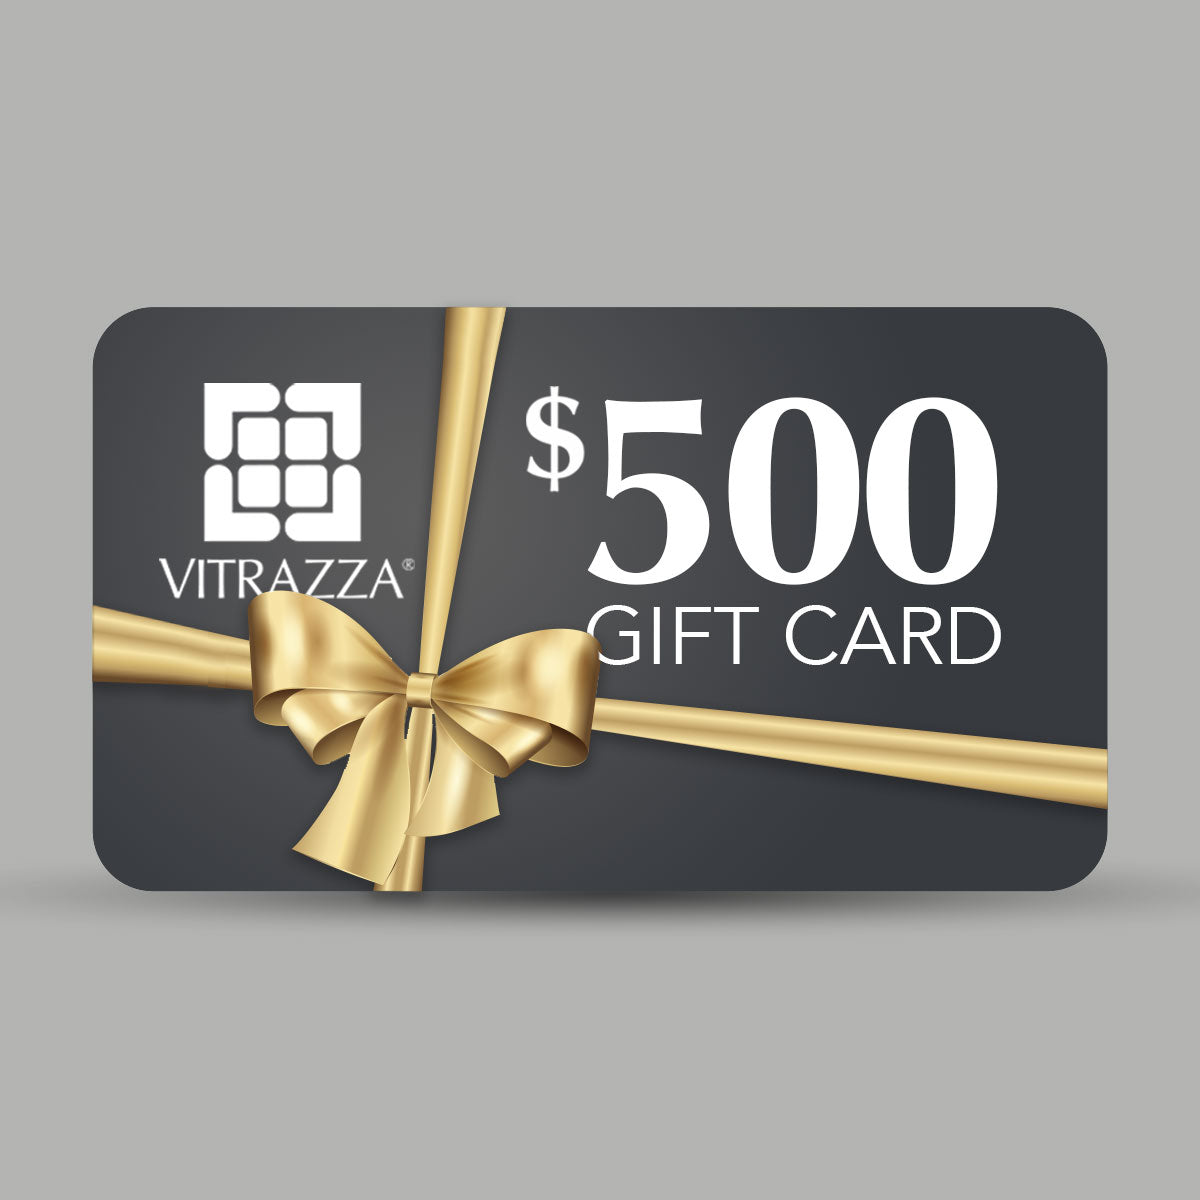 variant_title: Gift Card | Size: $500.00 USD :: alt_text: